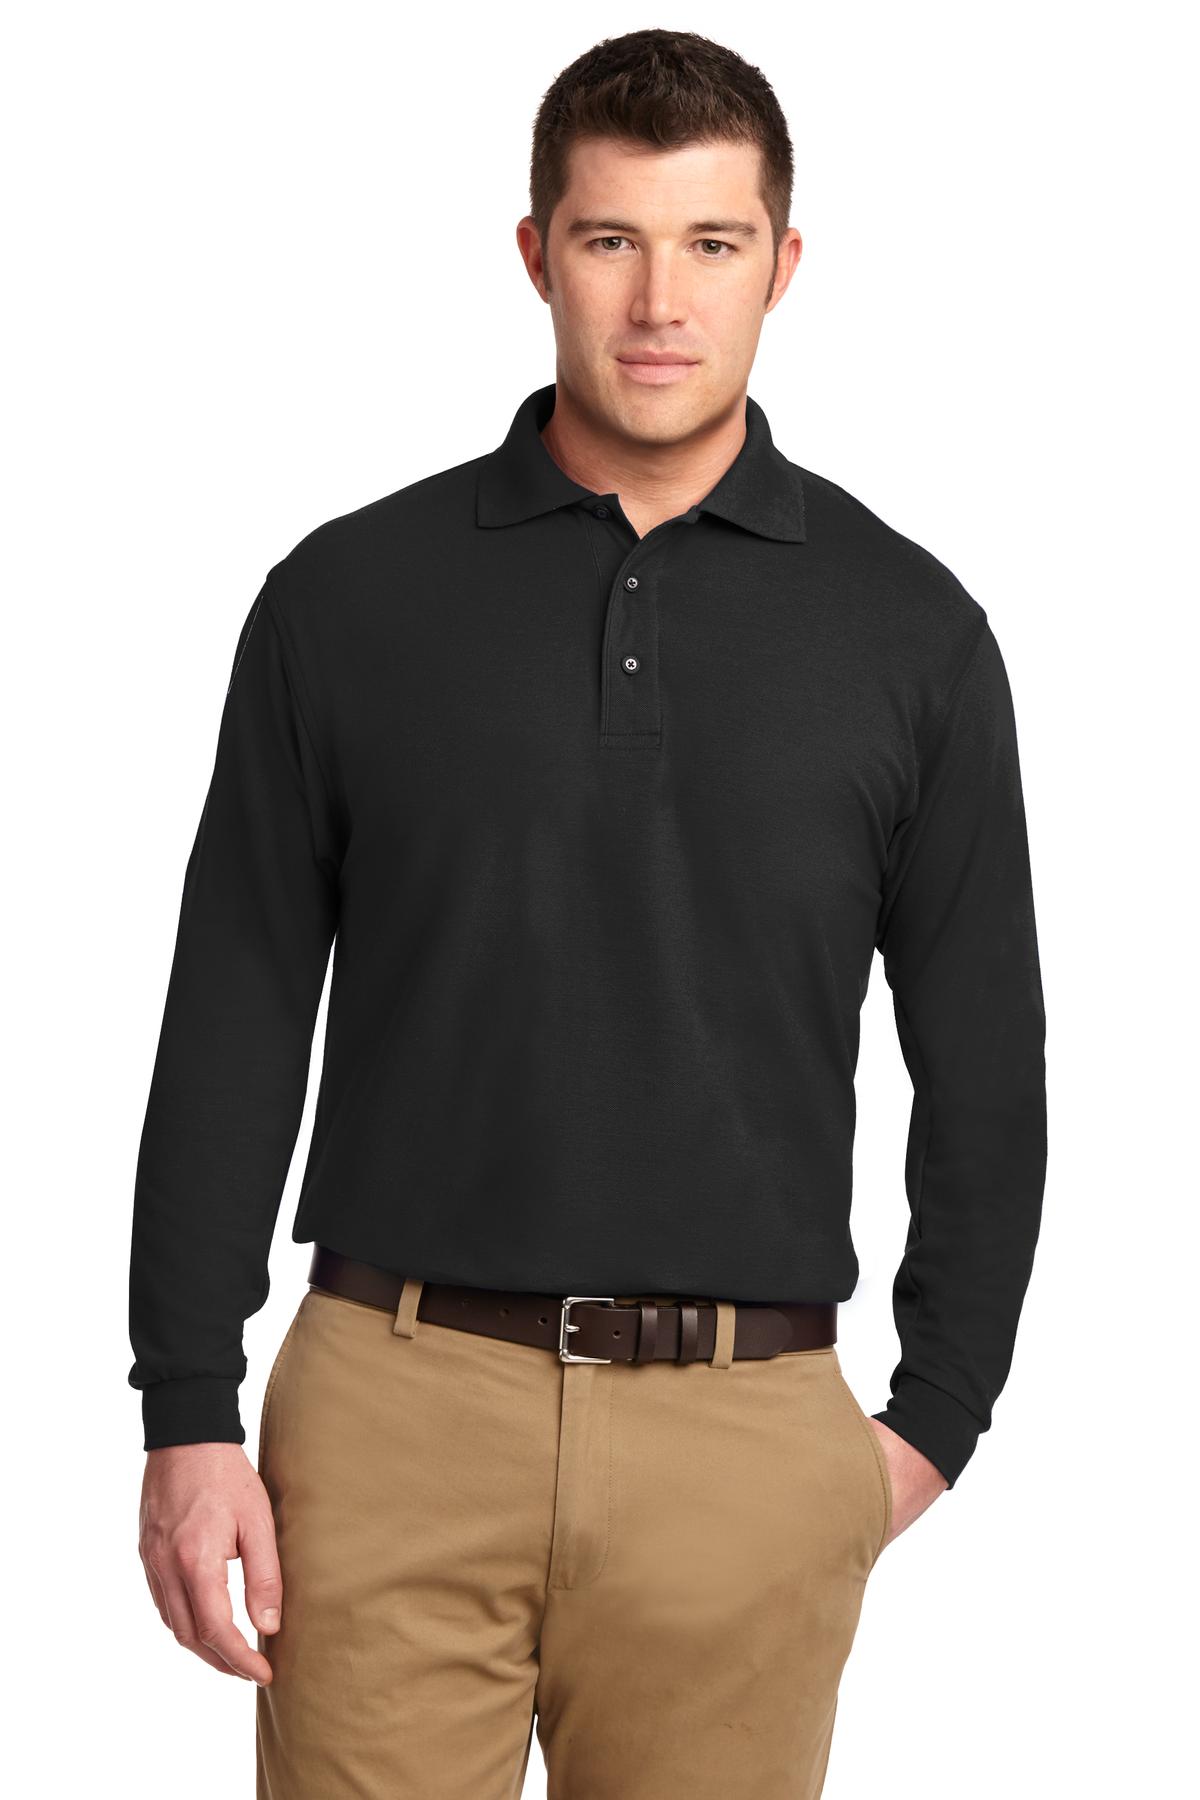 Port Authority Men's Long Sleeve Silk Touch Polo. K500LS.